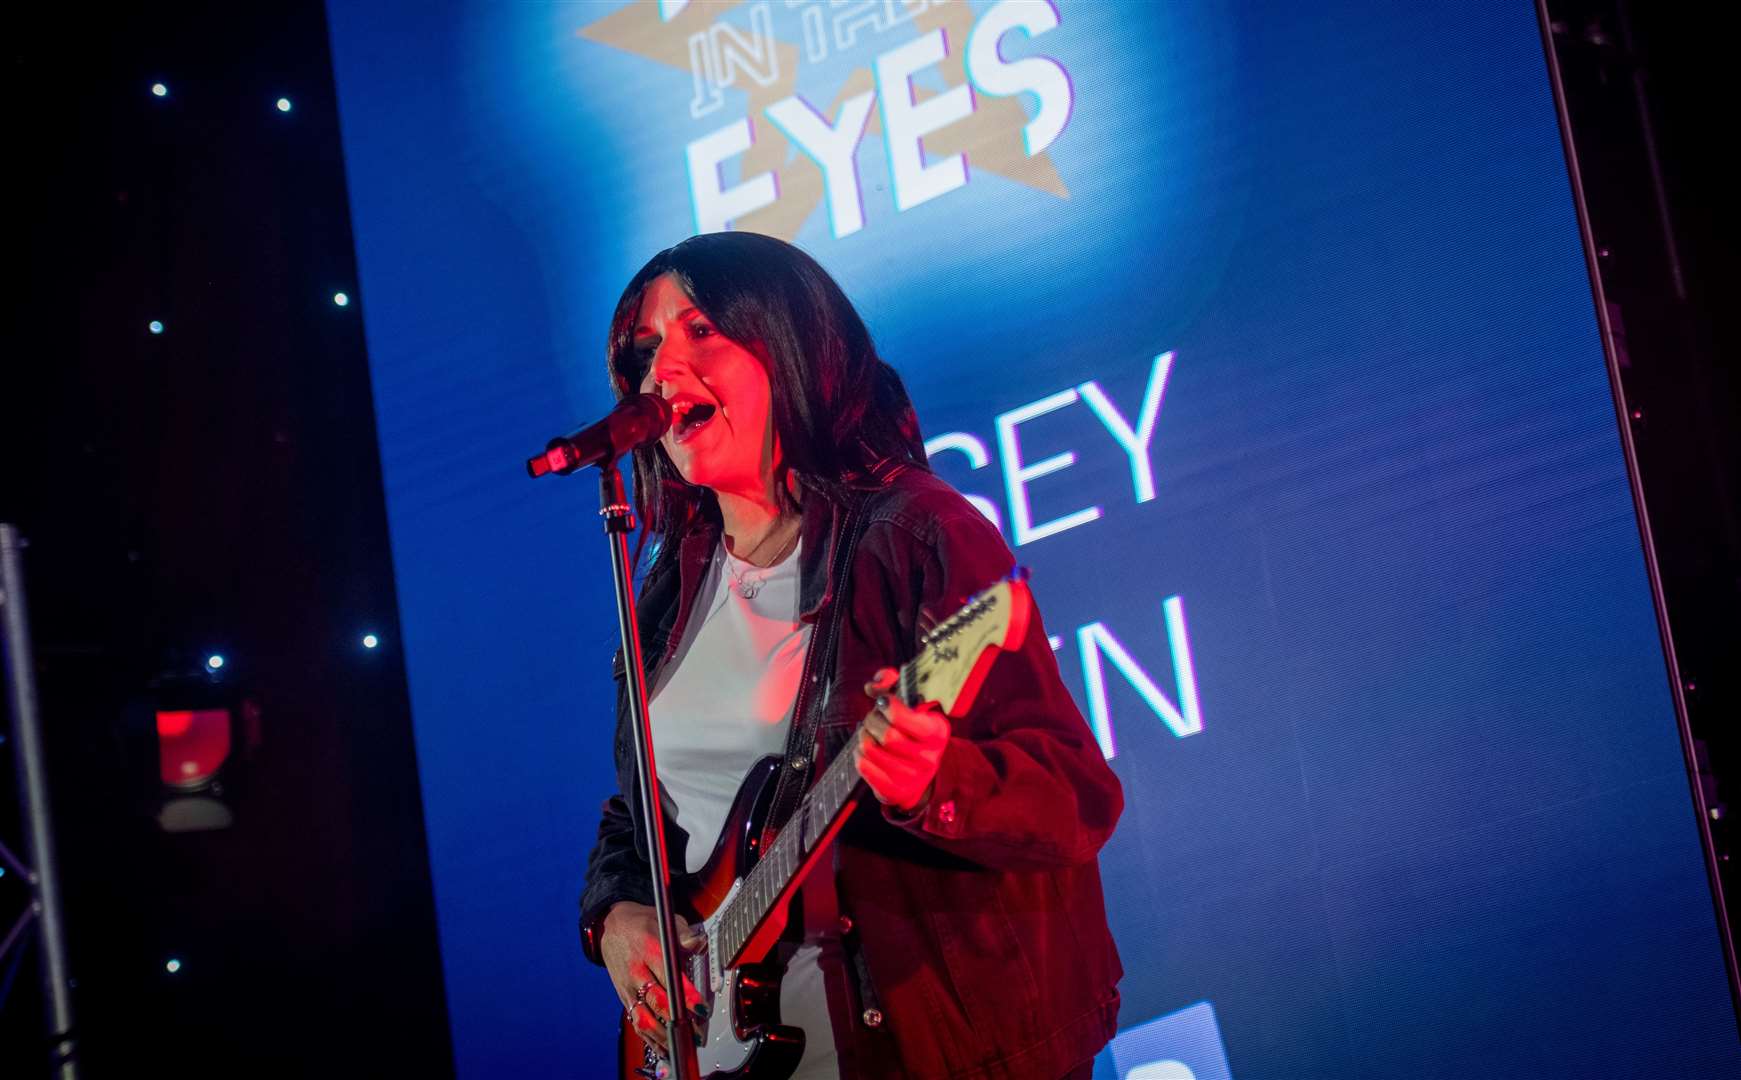 Linsey Stein took to the stage as the renowned Texas singer, Sharleen Spiteri. Picture: Callum Mackay